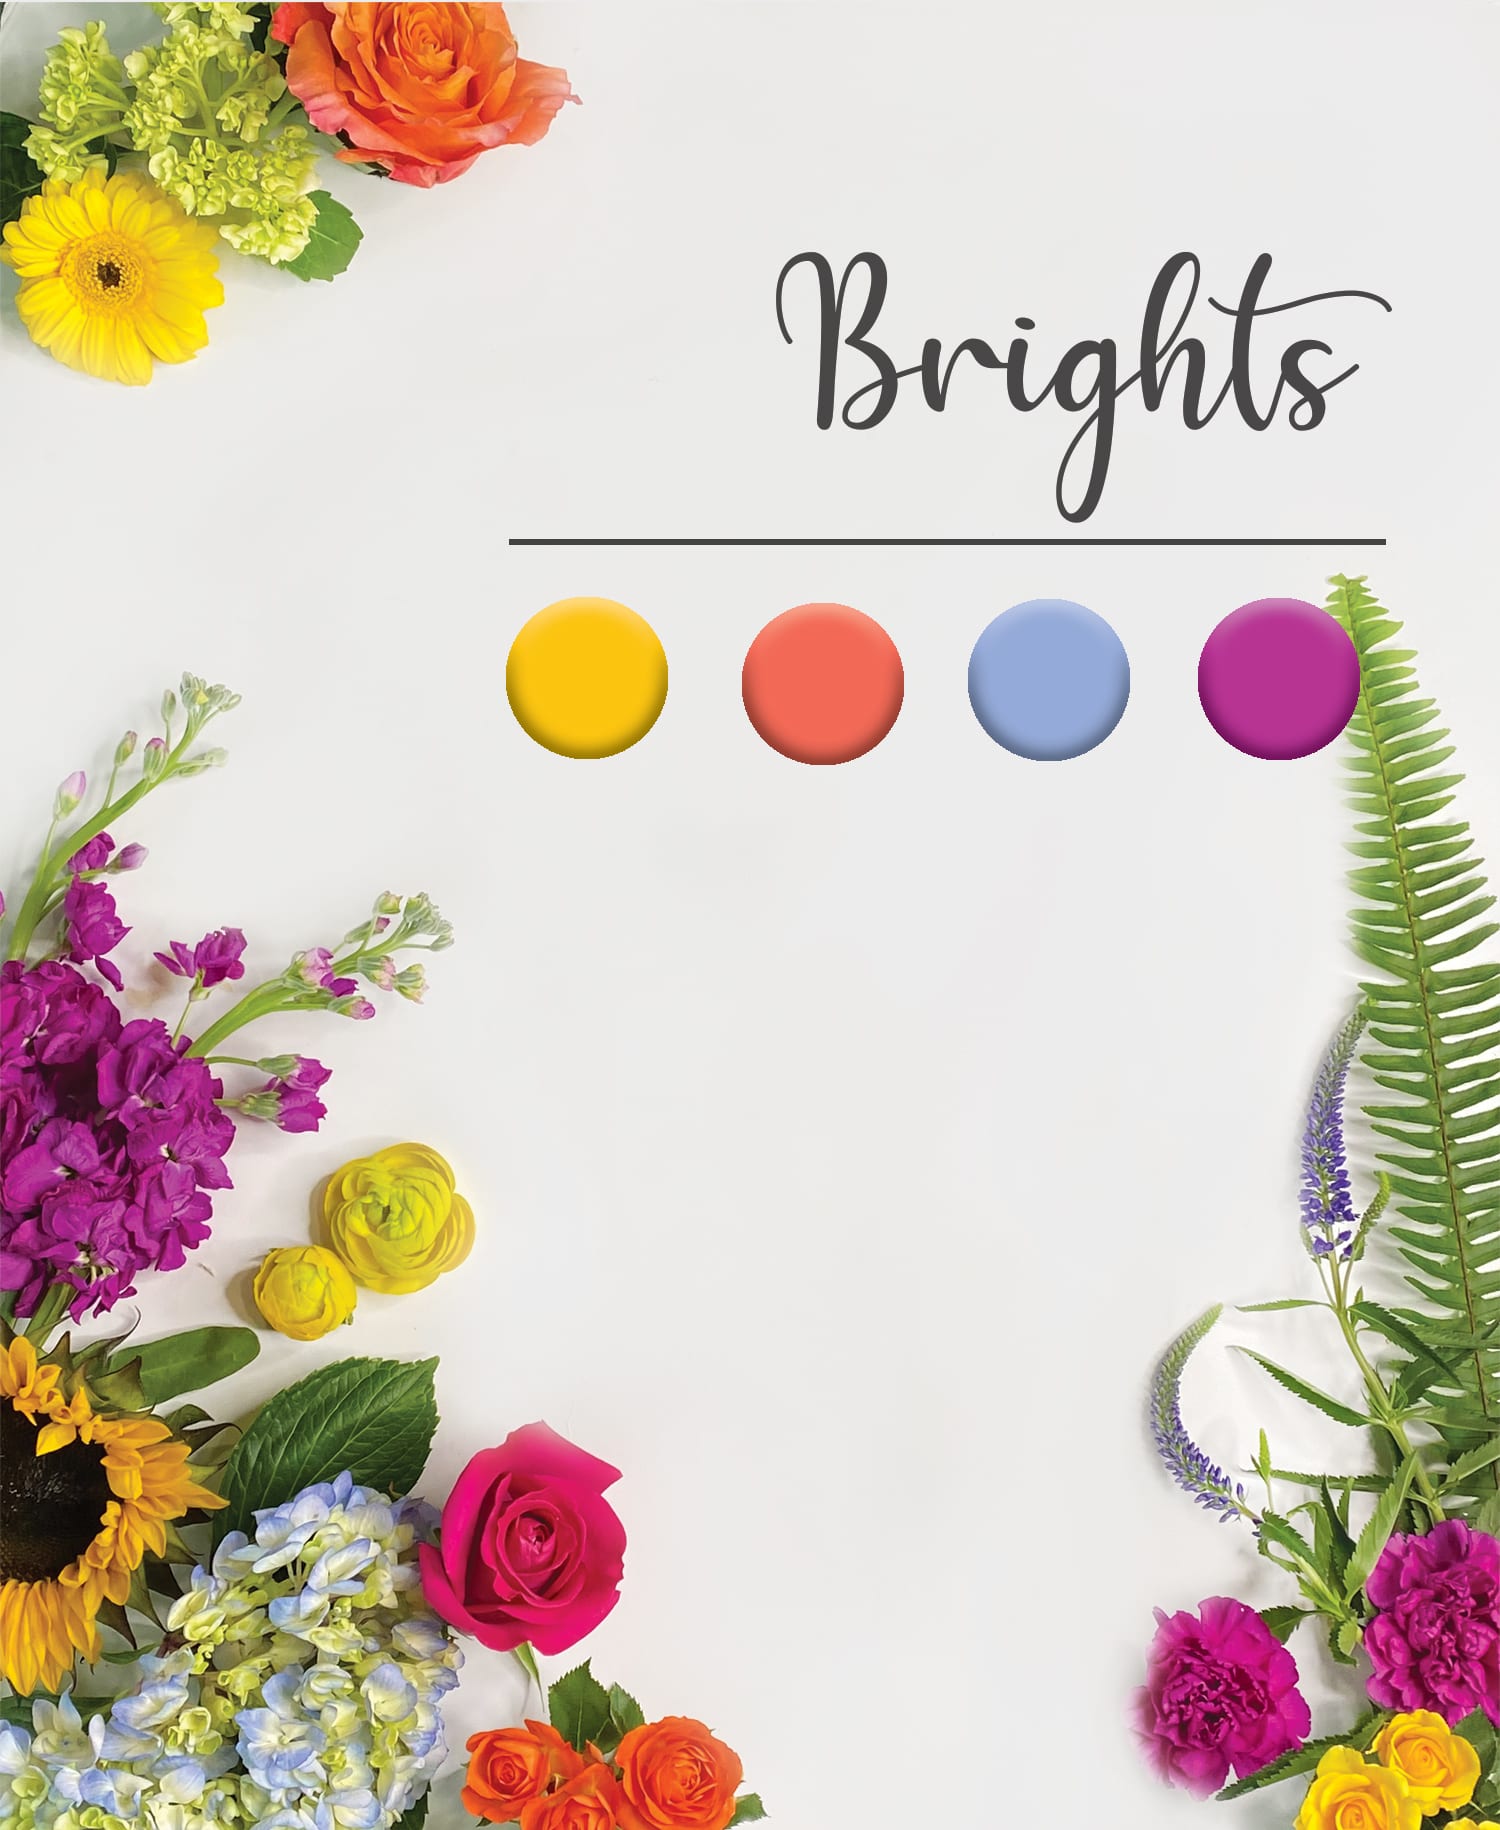 Designer's Choice - Brights - Our talented designers will use premium flowers in a vibrant color palette to create a gorgeous, modern style arrangement!  To see examples of our work, click on the Gallery tab above, or find us on Instagram and Facebook (links can be found at the bottom of this page).